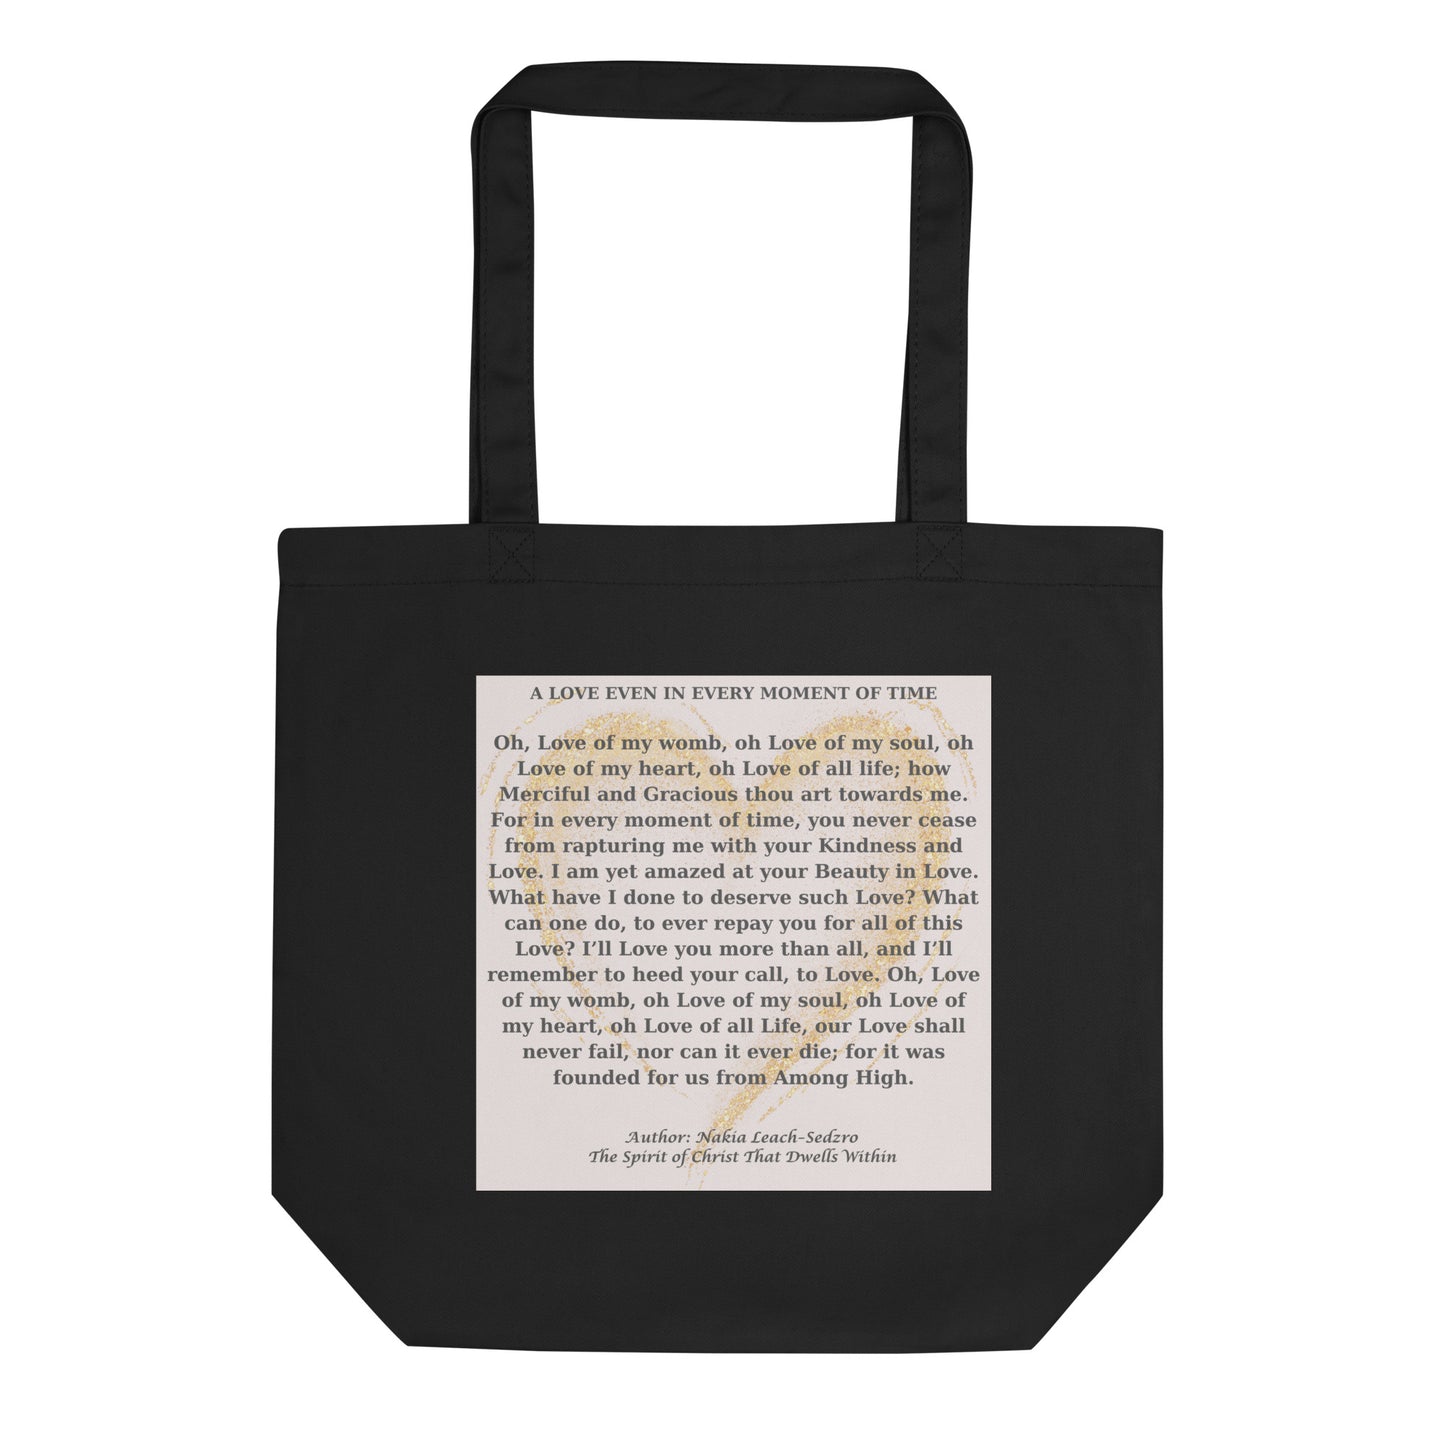 By Faith "A Love In Every Moment Of Time" Poem Eco Tote Bag